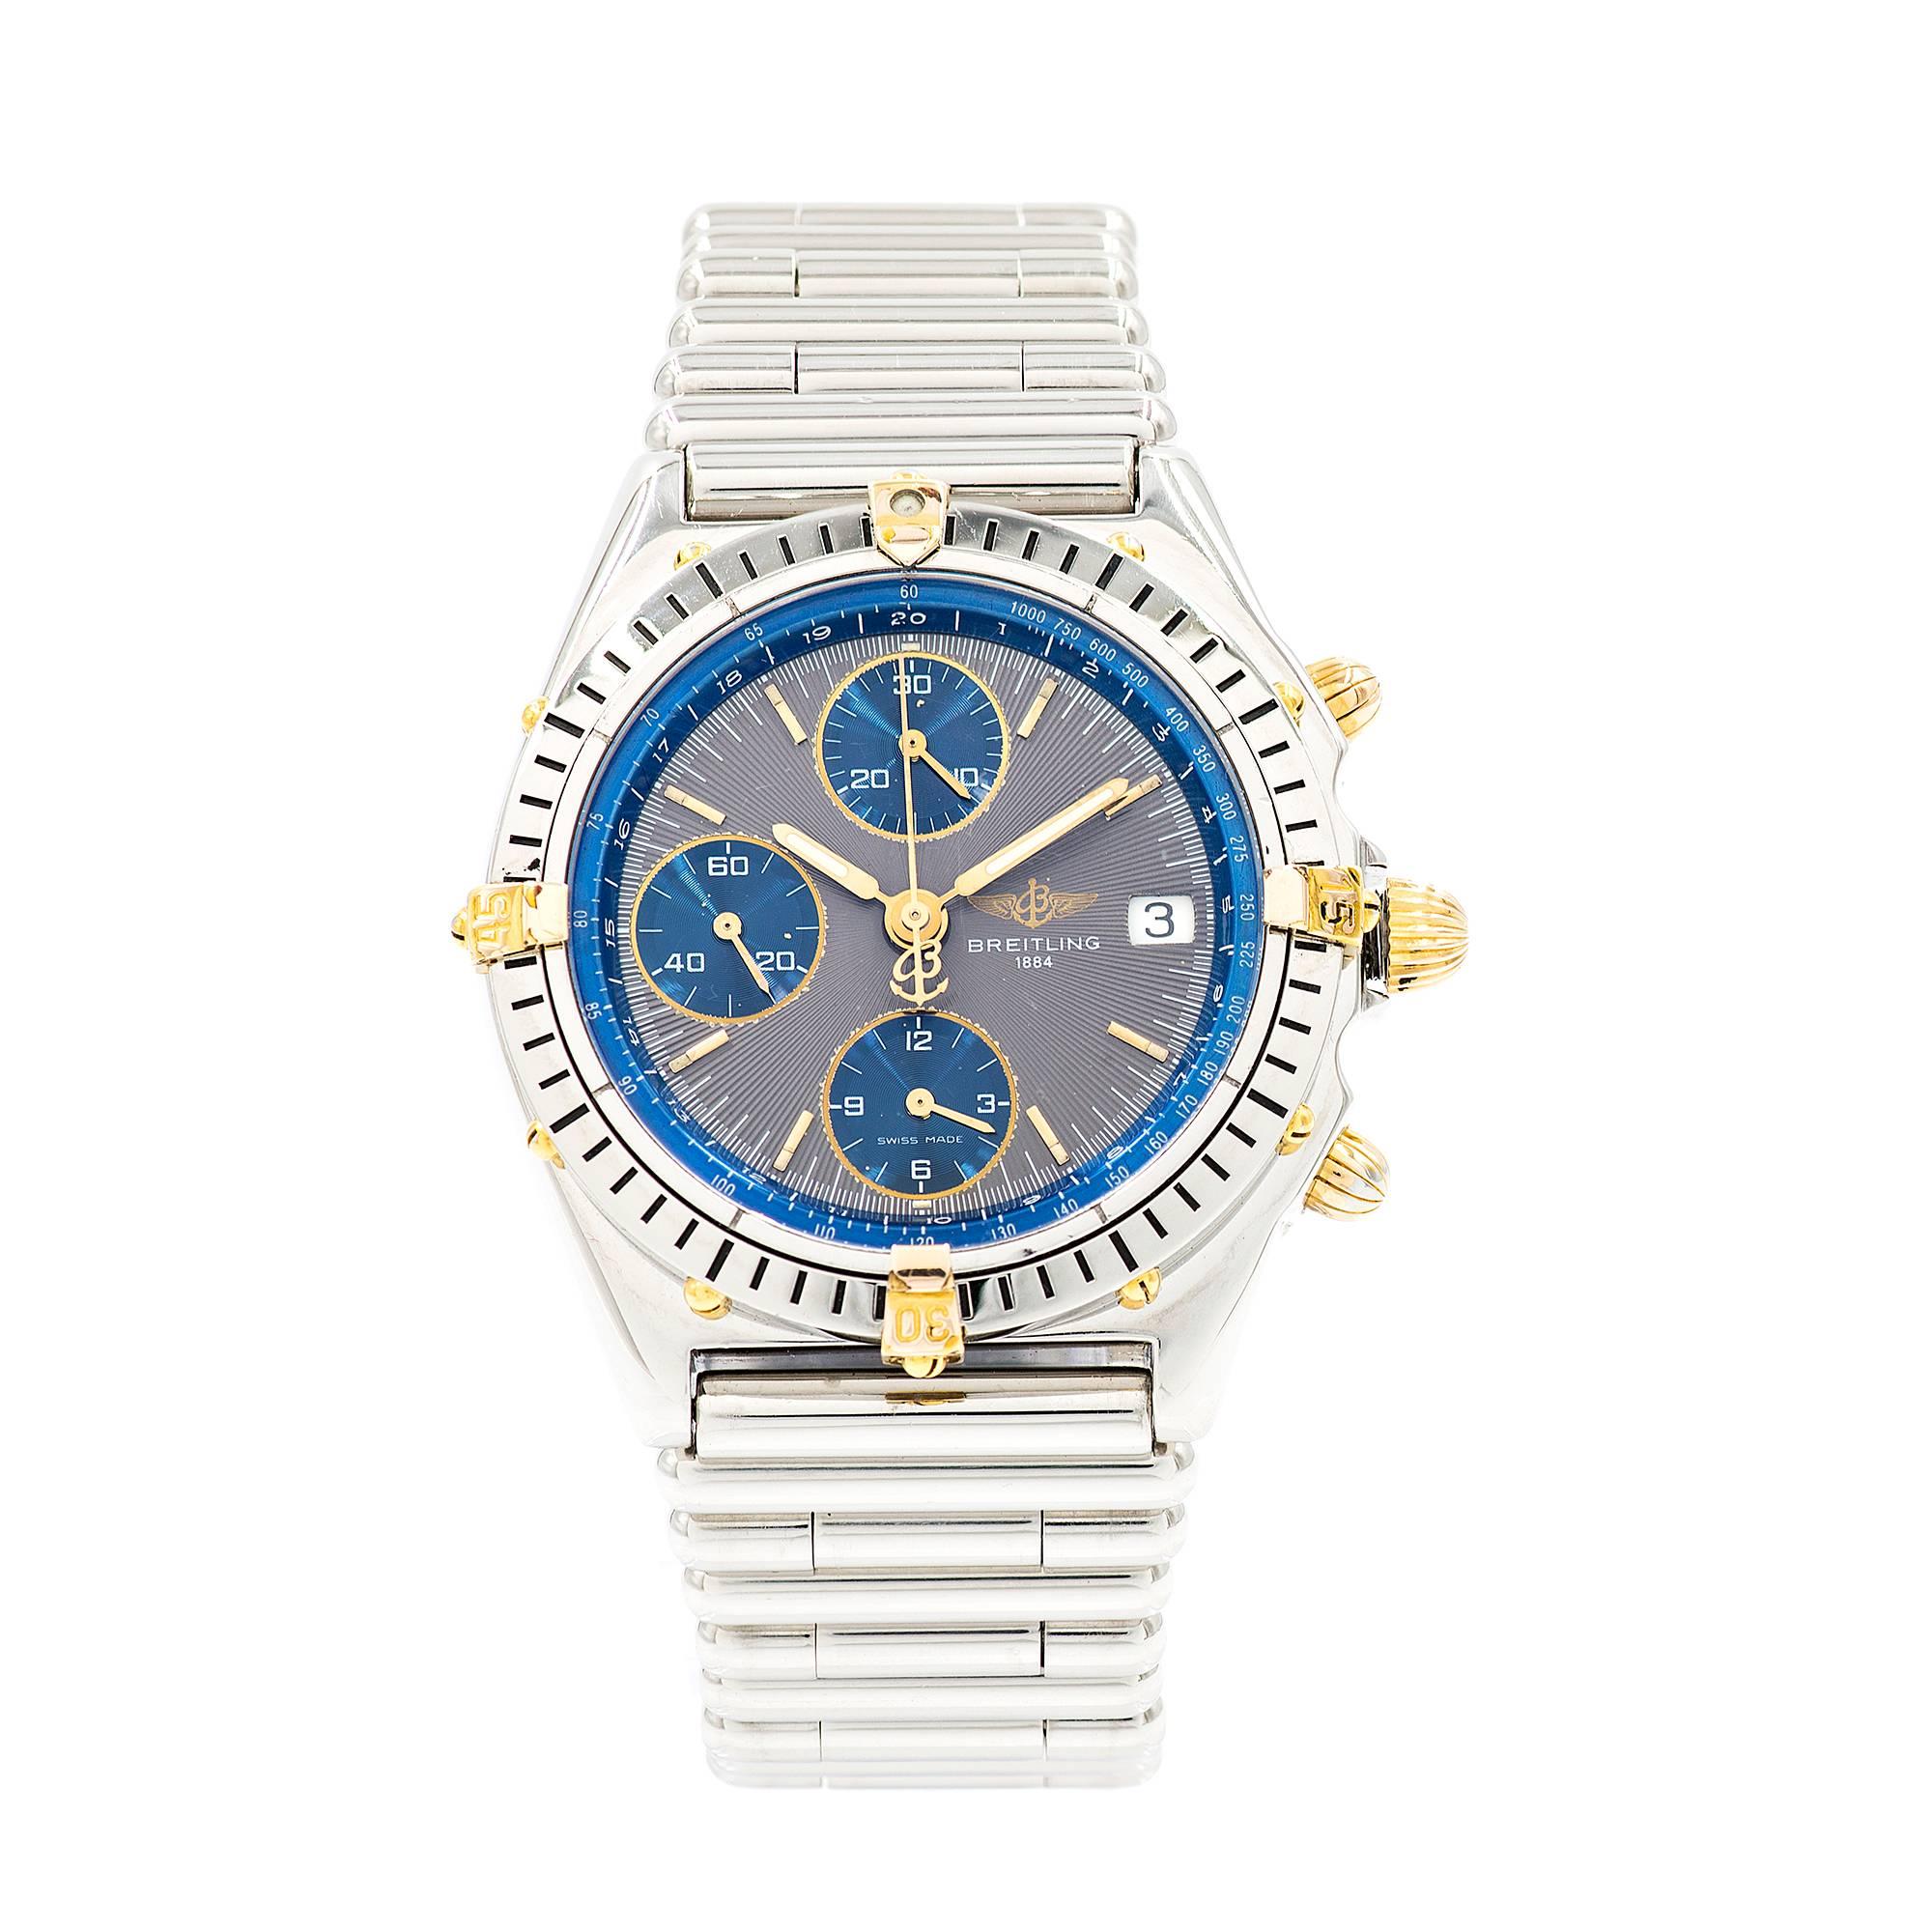 Breitling men’s Chronograph Automatic Date wristwatch in 18k yellow gold and steel with a steel Rolo band and a two tone grey and blue dial. Restored to almost as new condition.

18k yellow gold
104.9 grams
Length: 8 inches – can be shortened and